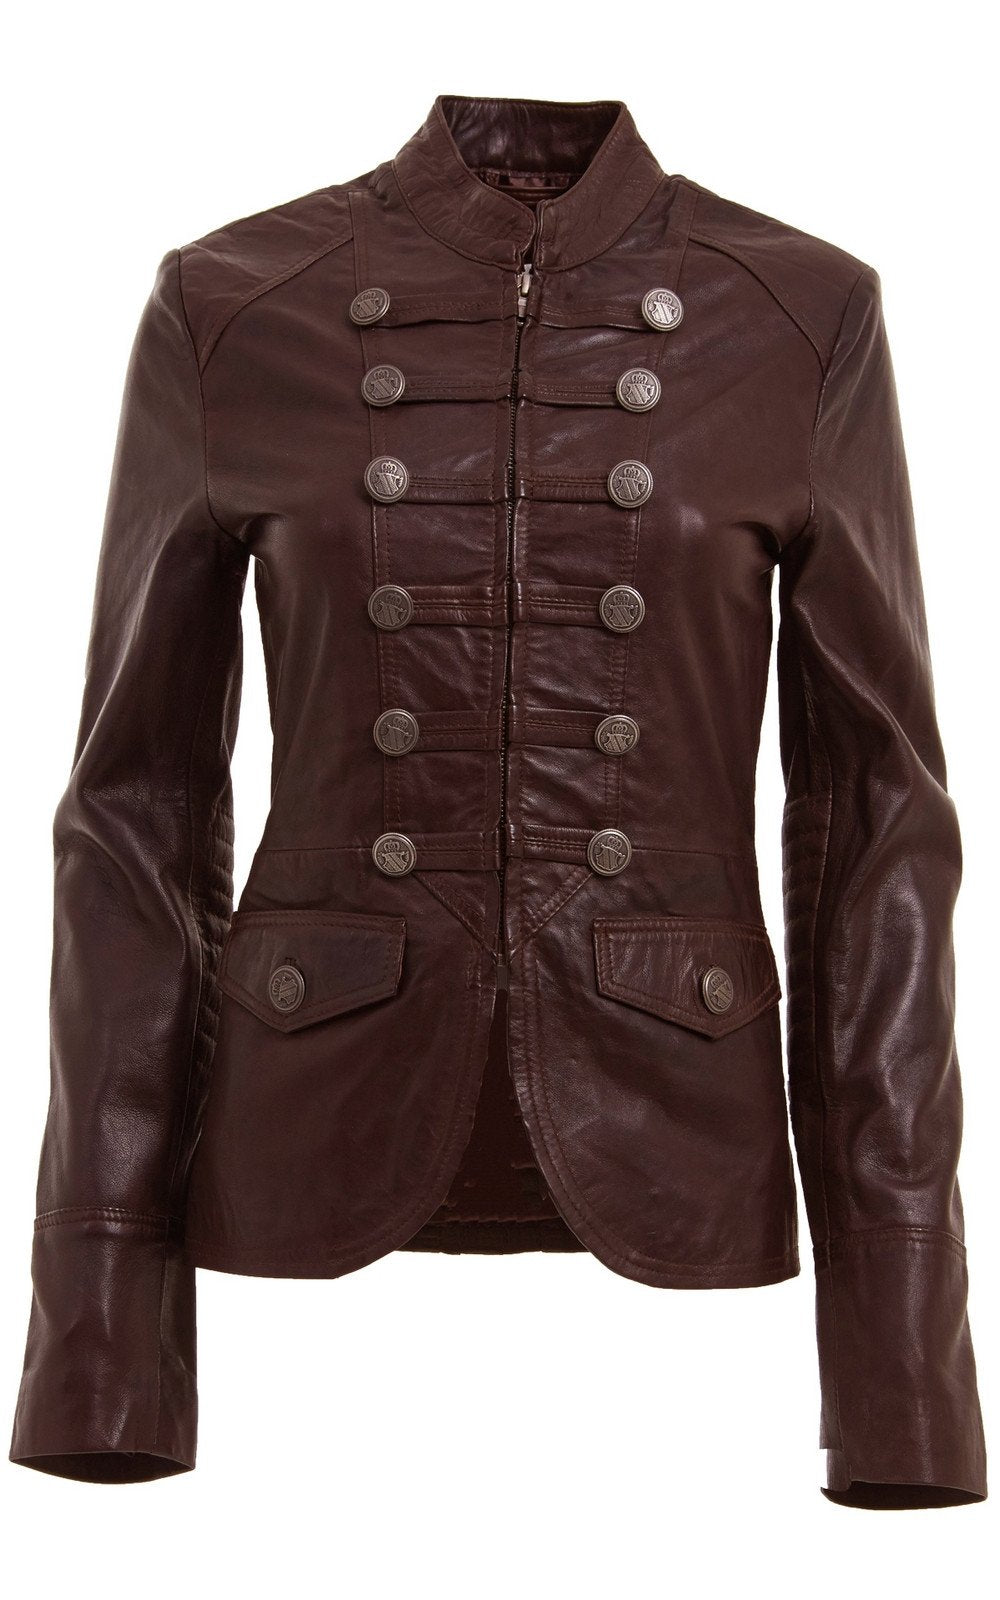 WOMENS BROWN AND BLACK MILITARY STYLE LEATHER BLAZER JACKET